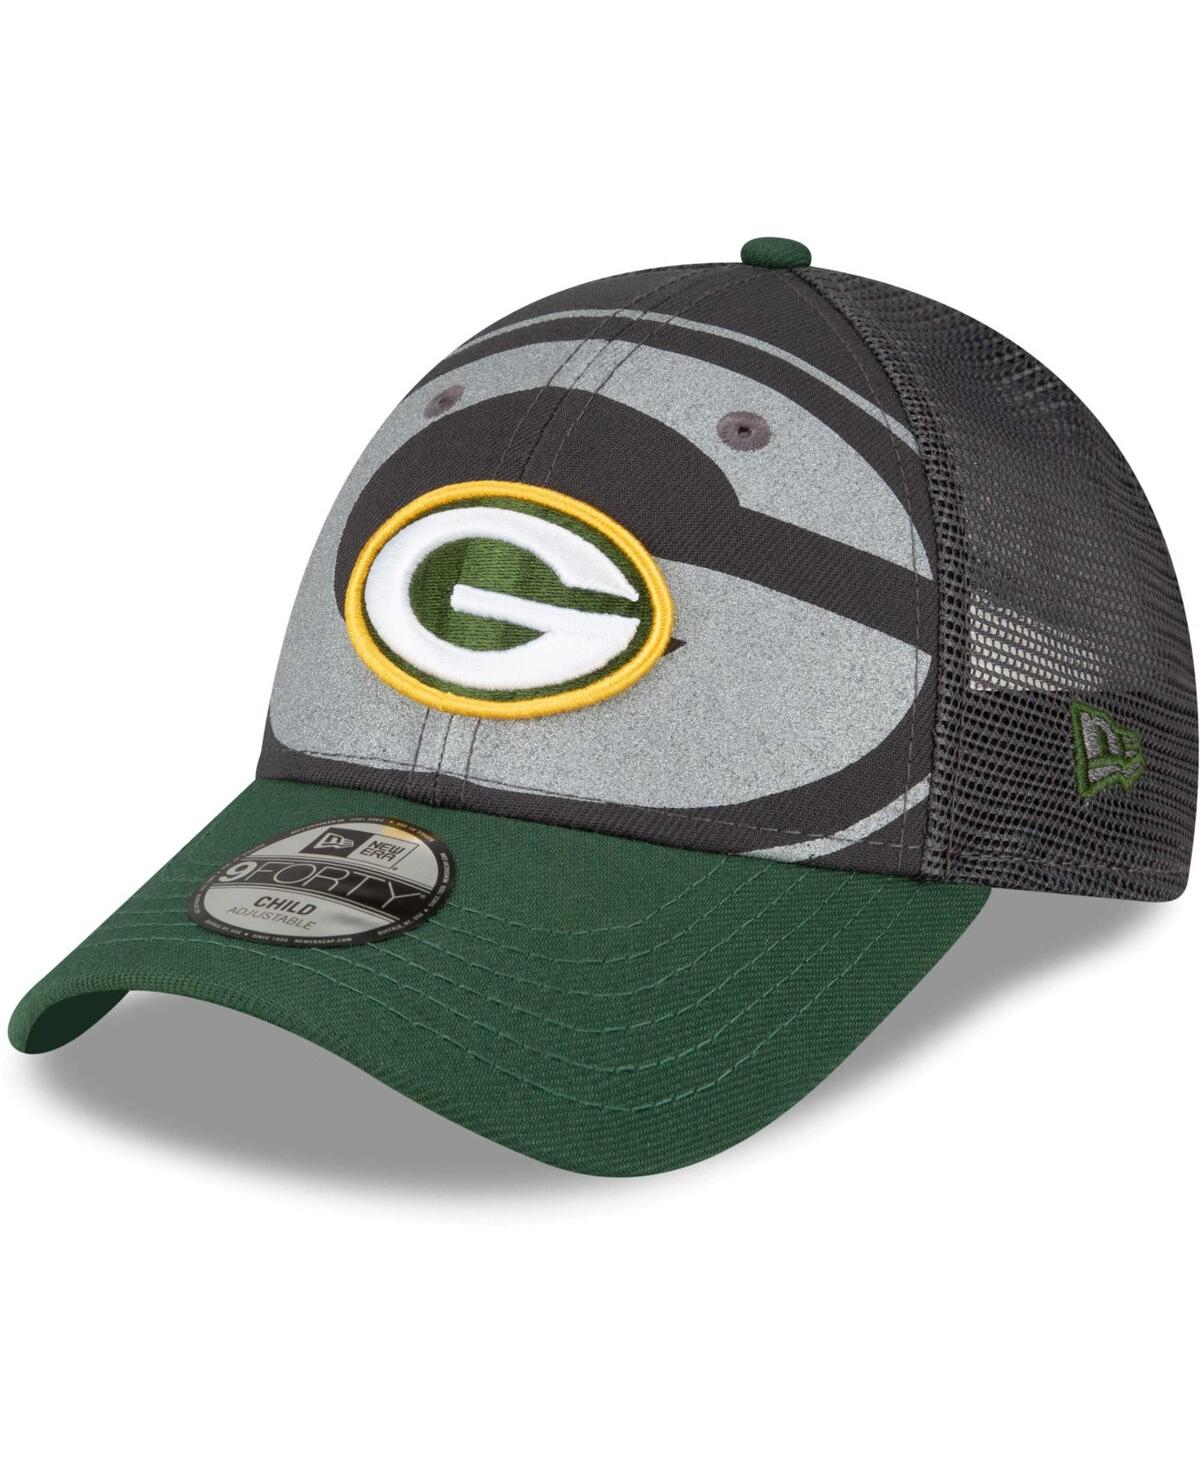 New Era Kids' Big Boys And Girls  Graphite Green Bay Packers Reflect 9forty Adjustable Hat